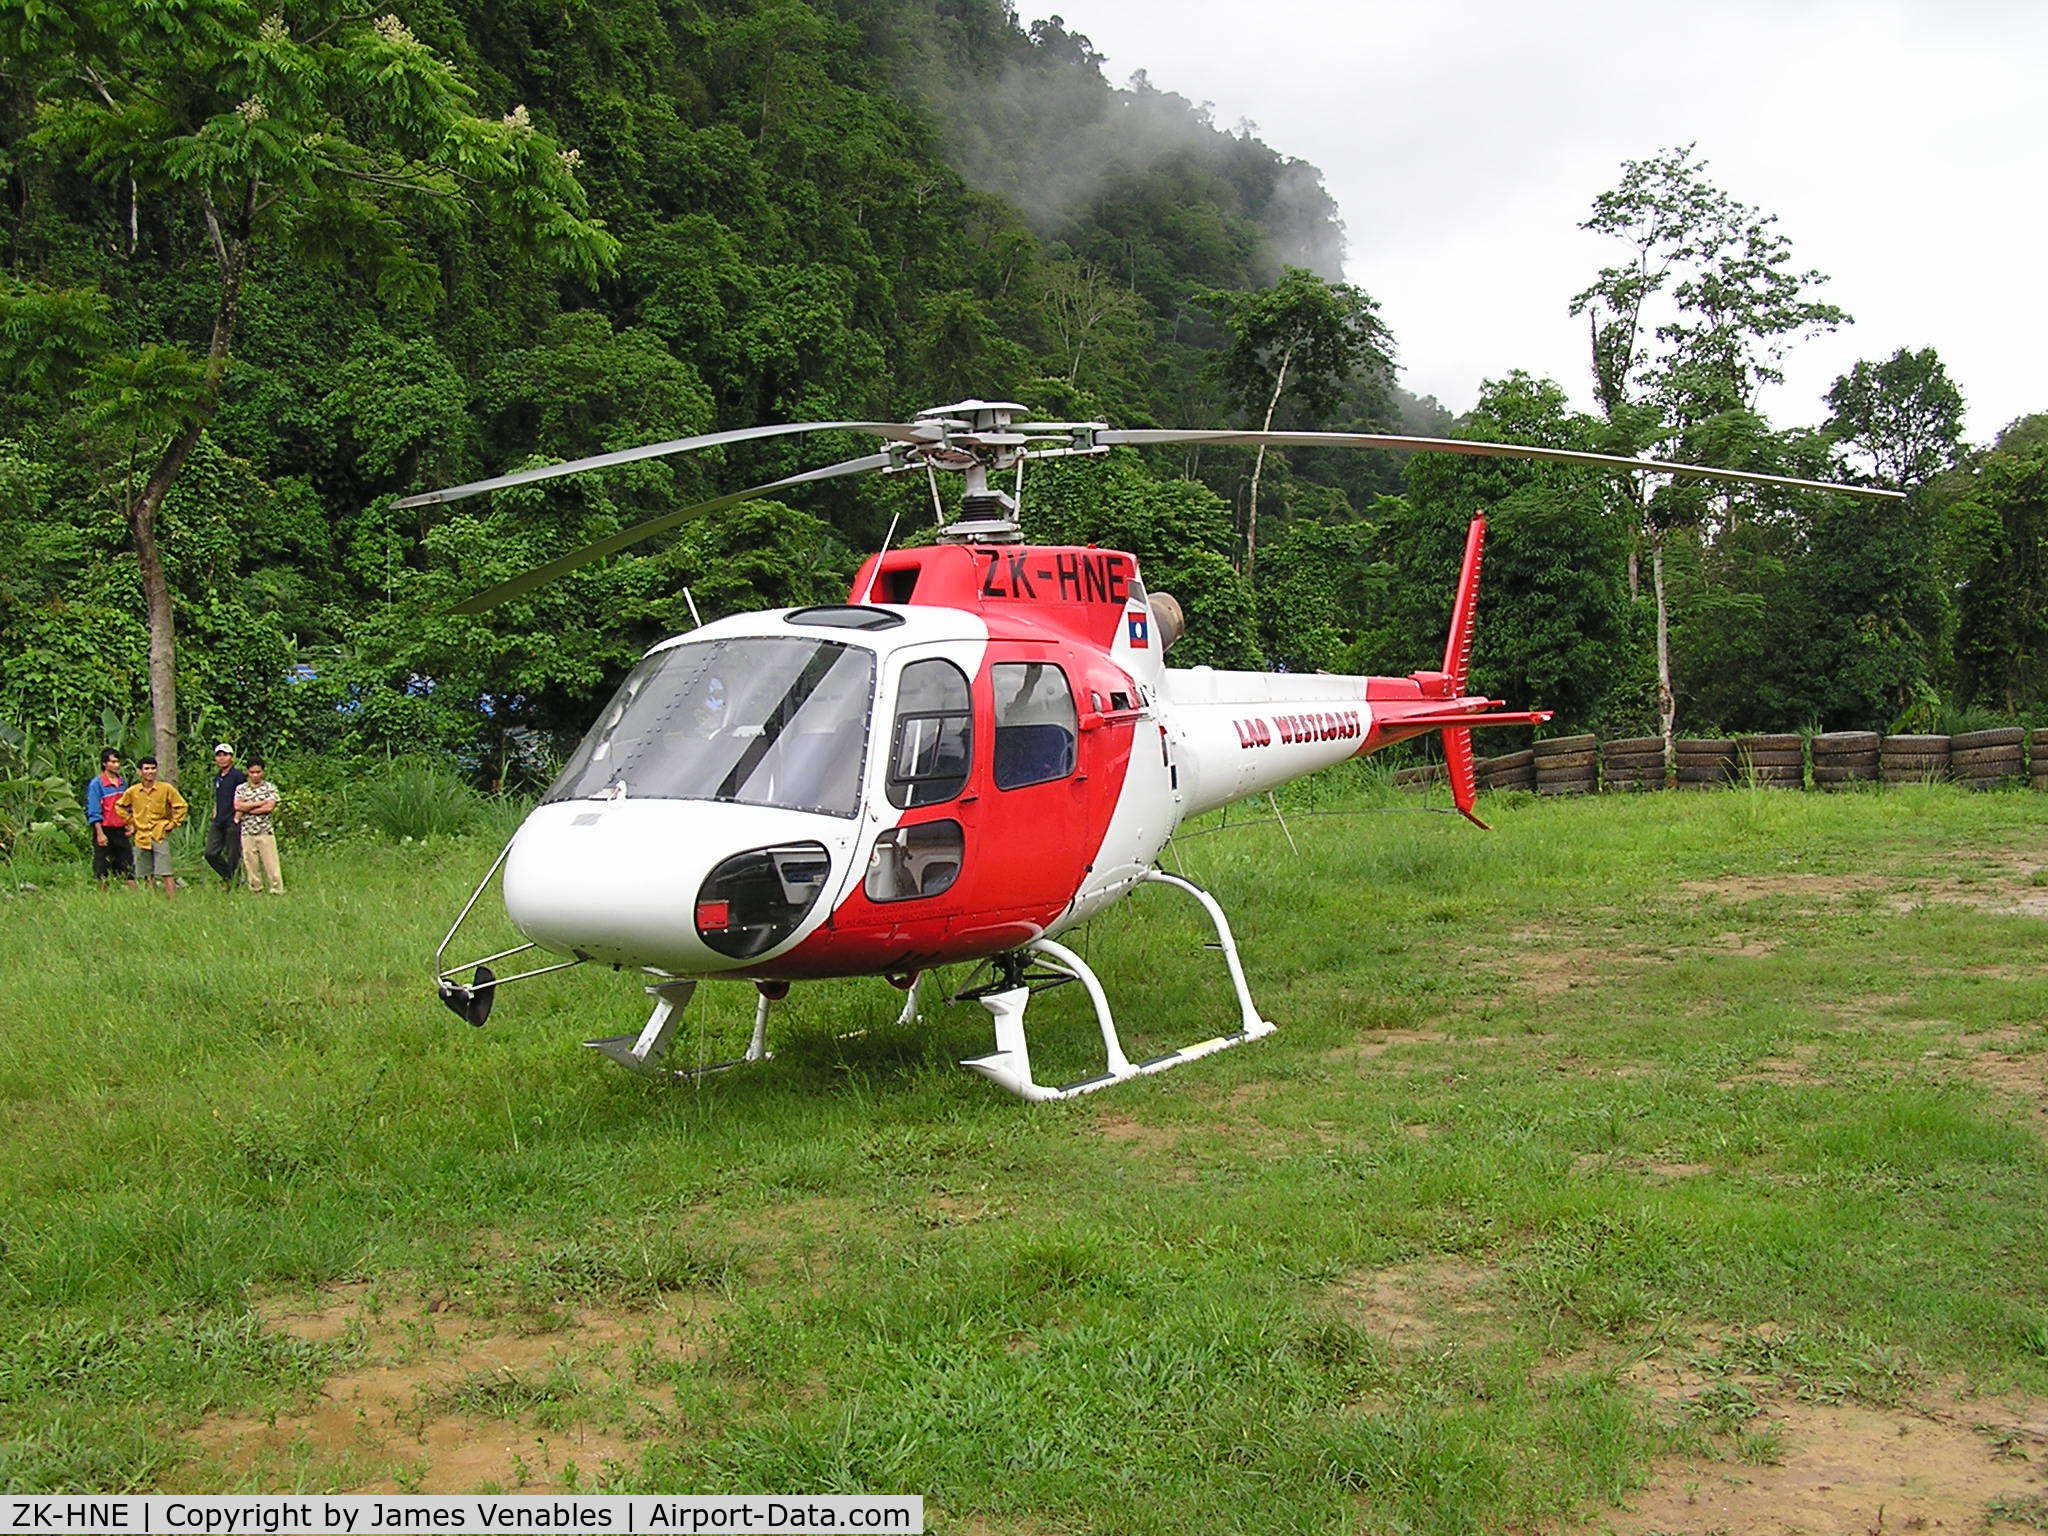 ZK-HNE, Aerospatiale AS-350B-2 Ecureuil C/N 2811, ZK-HNE, Lao Westcoast Helicopters. Taken at Pha Luang, Laos, May 2007